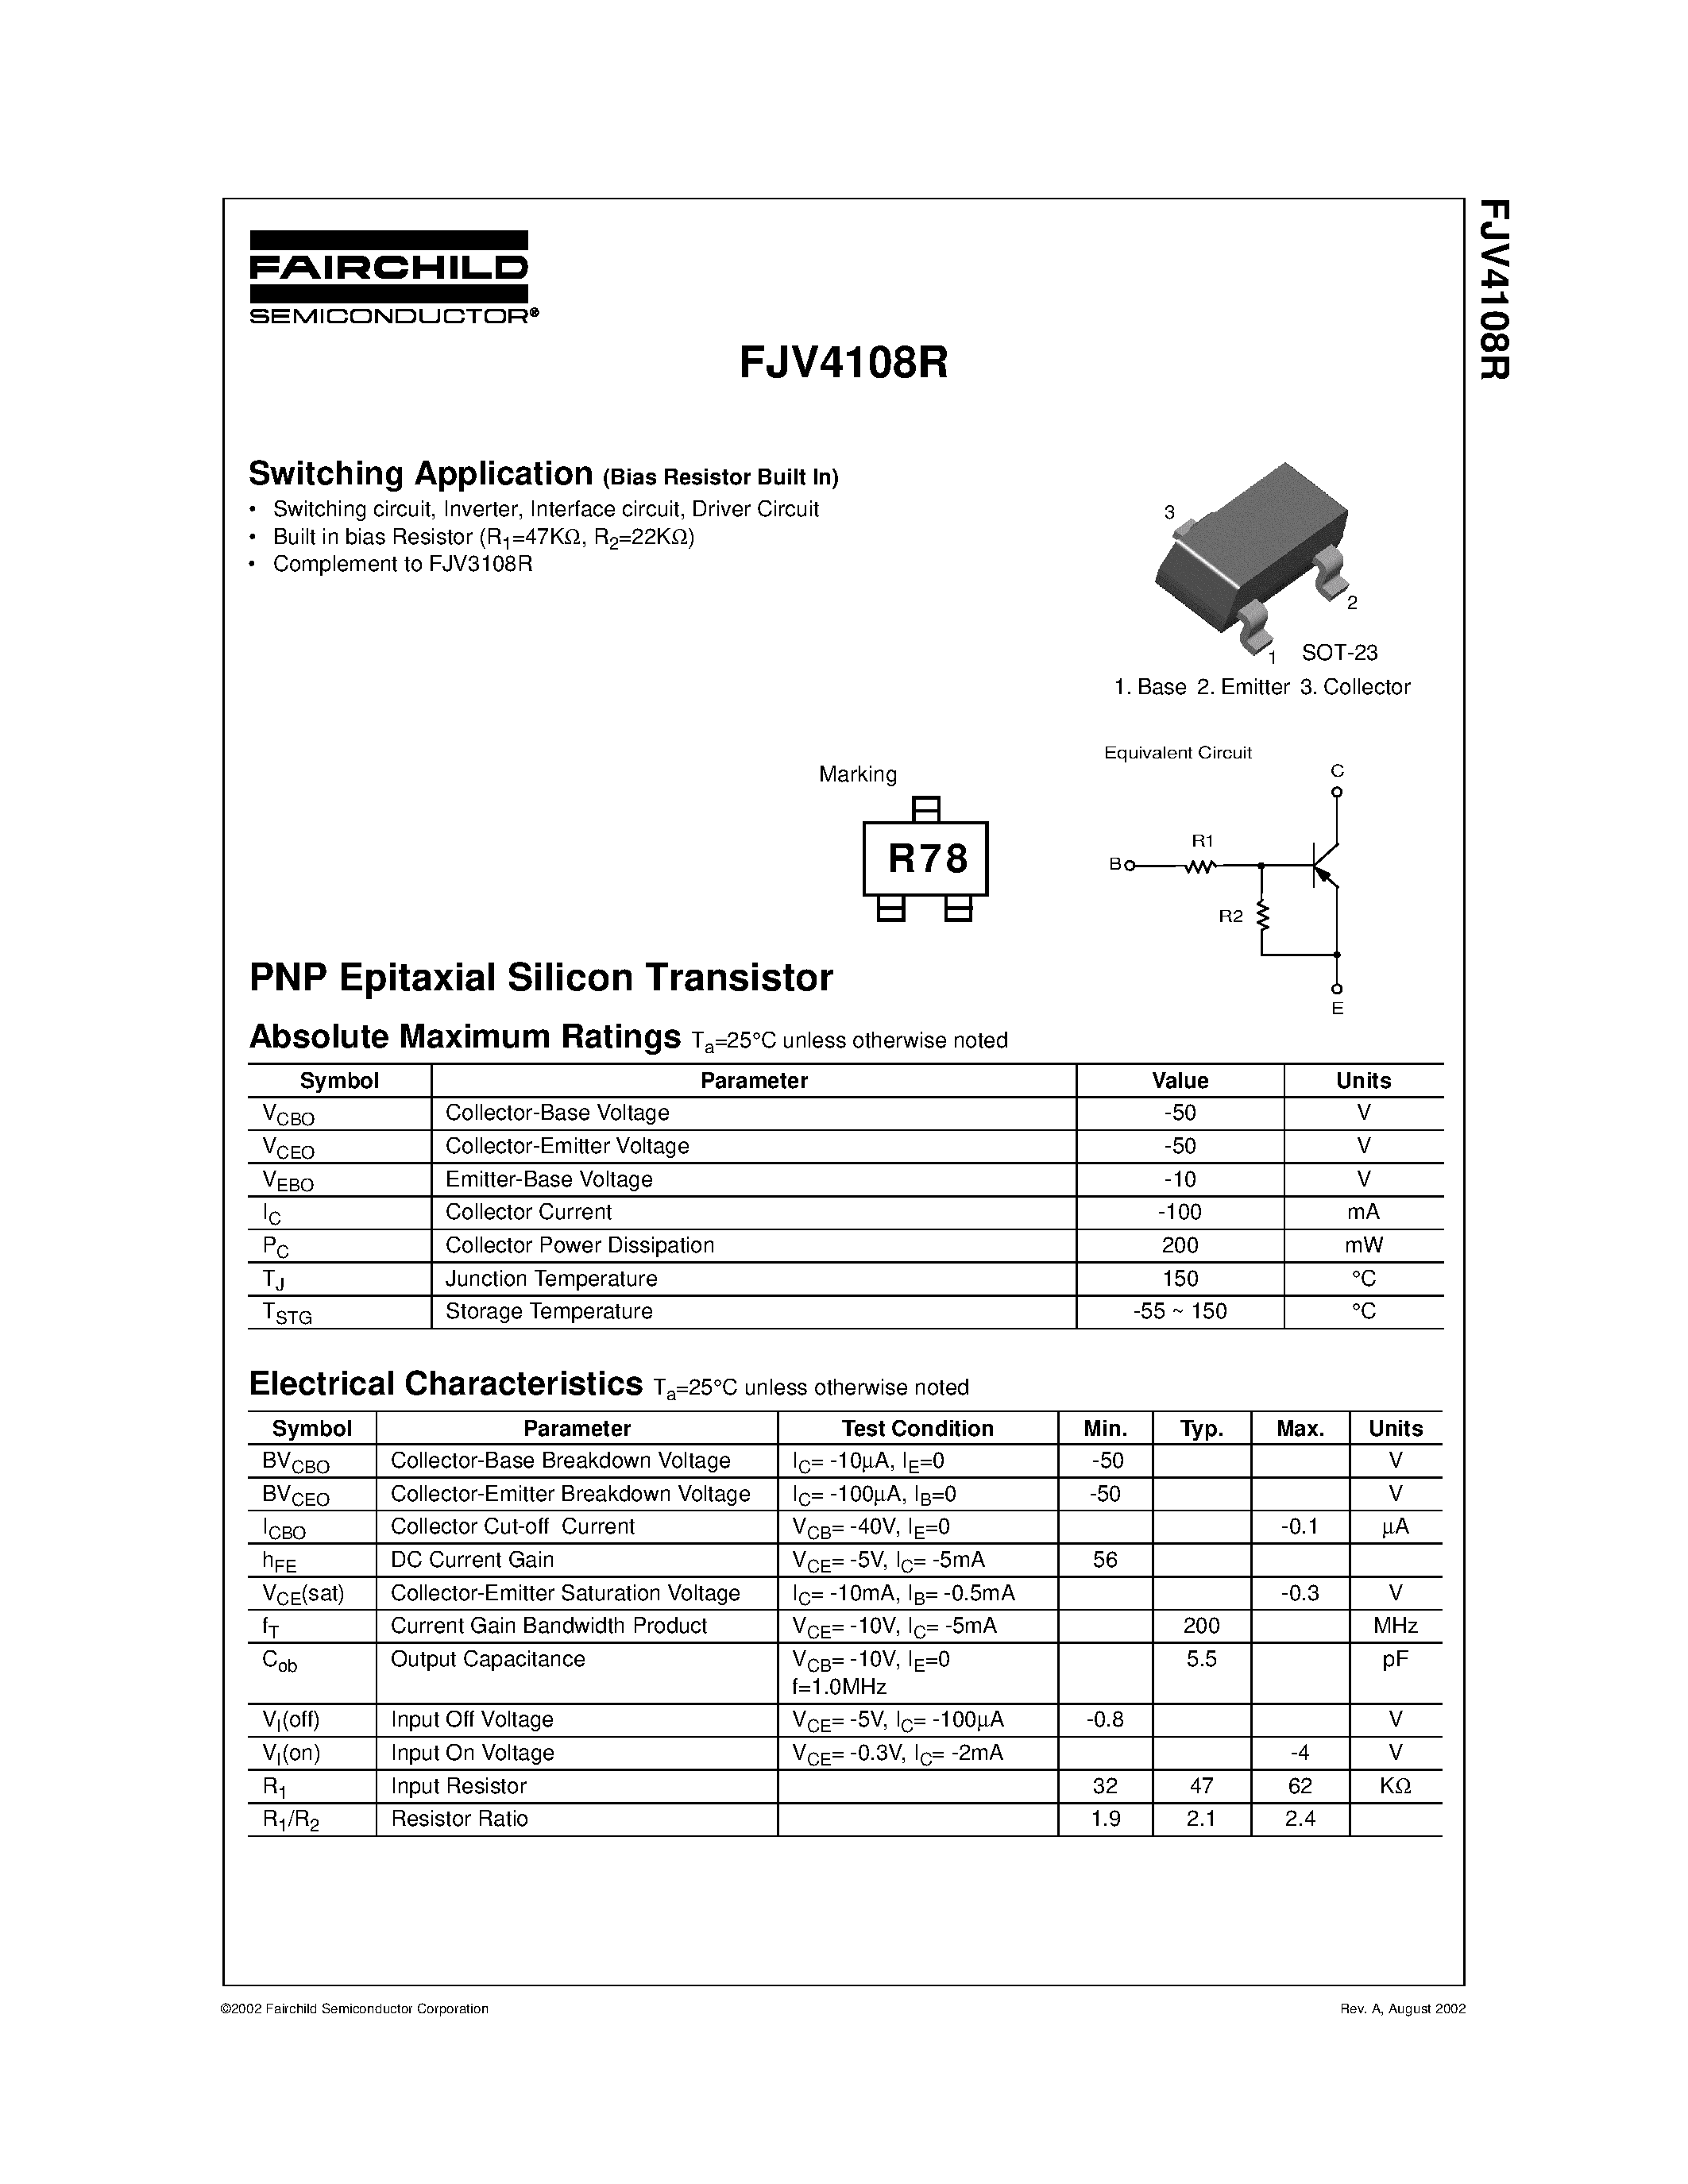 Datasheet FJV4108R - PNP Epitaxial Silicon Transistor page 1